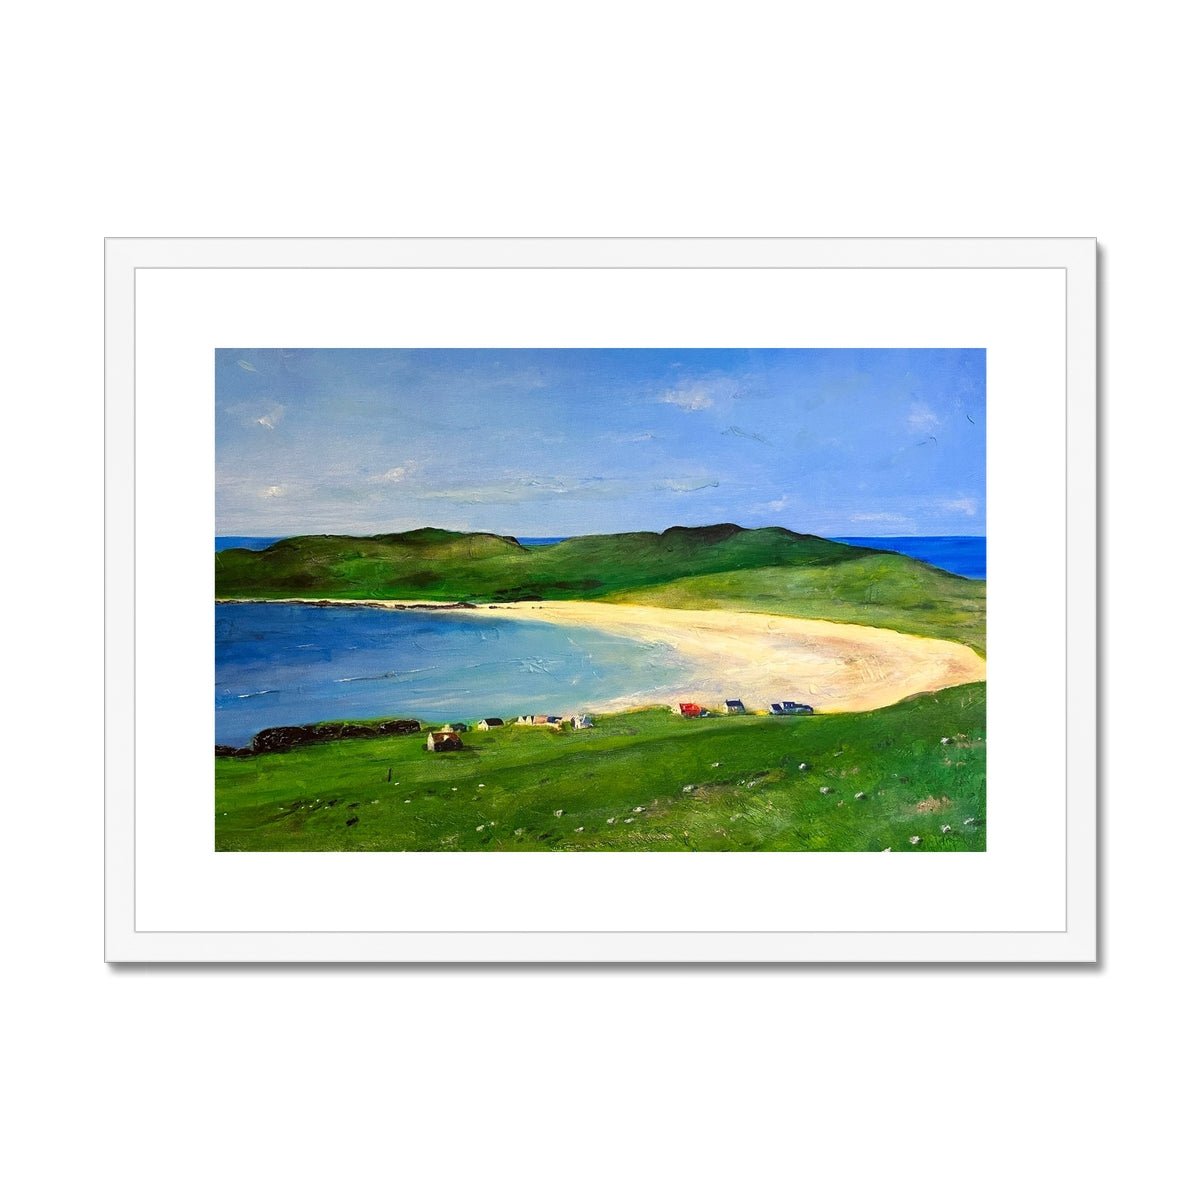 Balephuil Beach Tiree Painting | Framed & Mounted Prints From Scotland-Framed & Mounted Prints-Hebridean Islands Art Gallery-A2 Landscape-White Frame-Paintings, Prints, Homeware, Art Gifts From Scotland By Scottish Artist Kevin Hunter